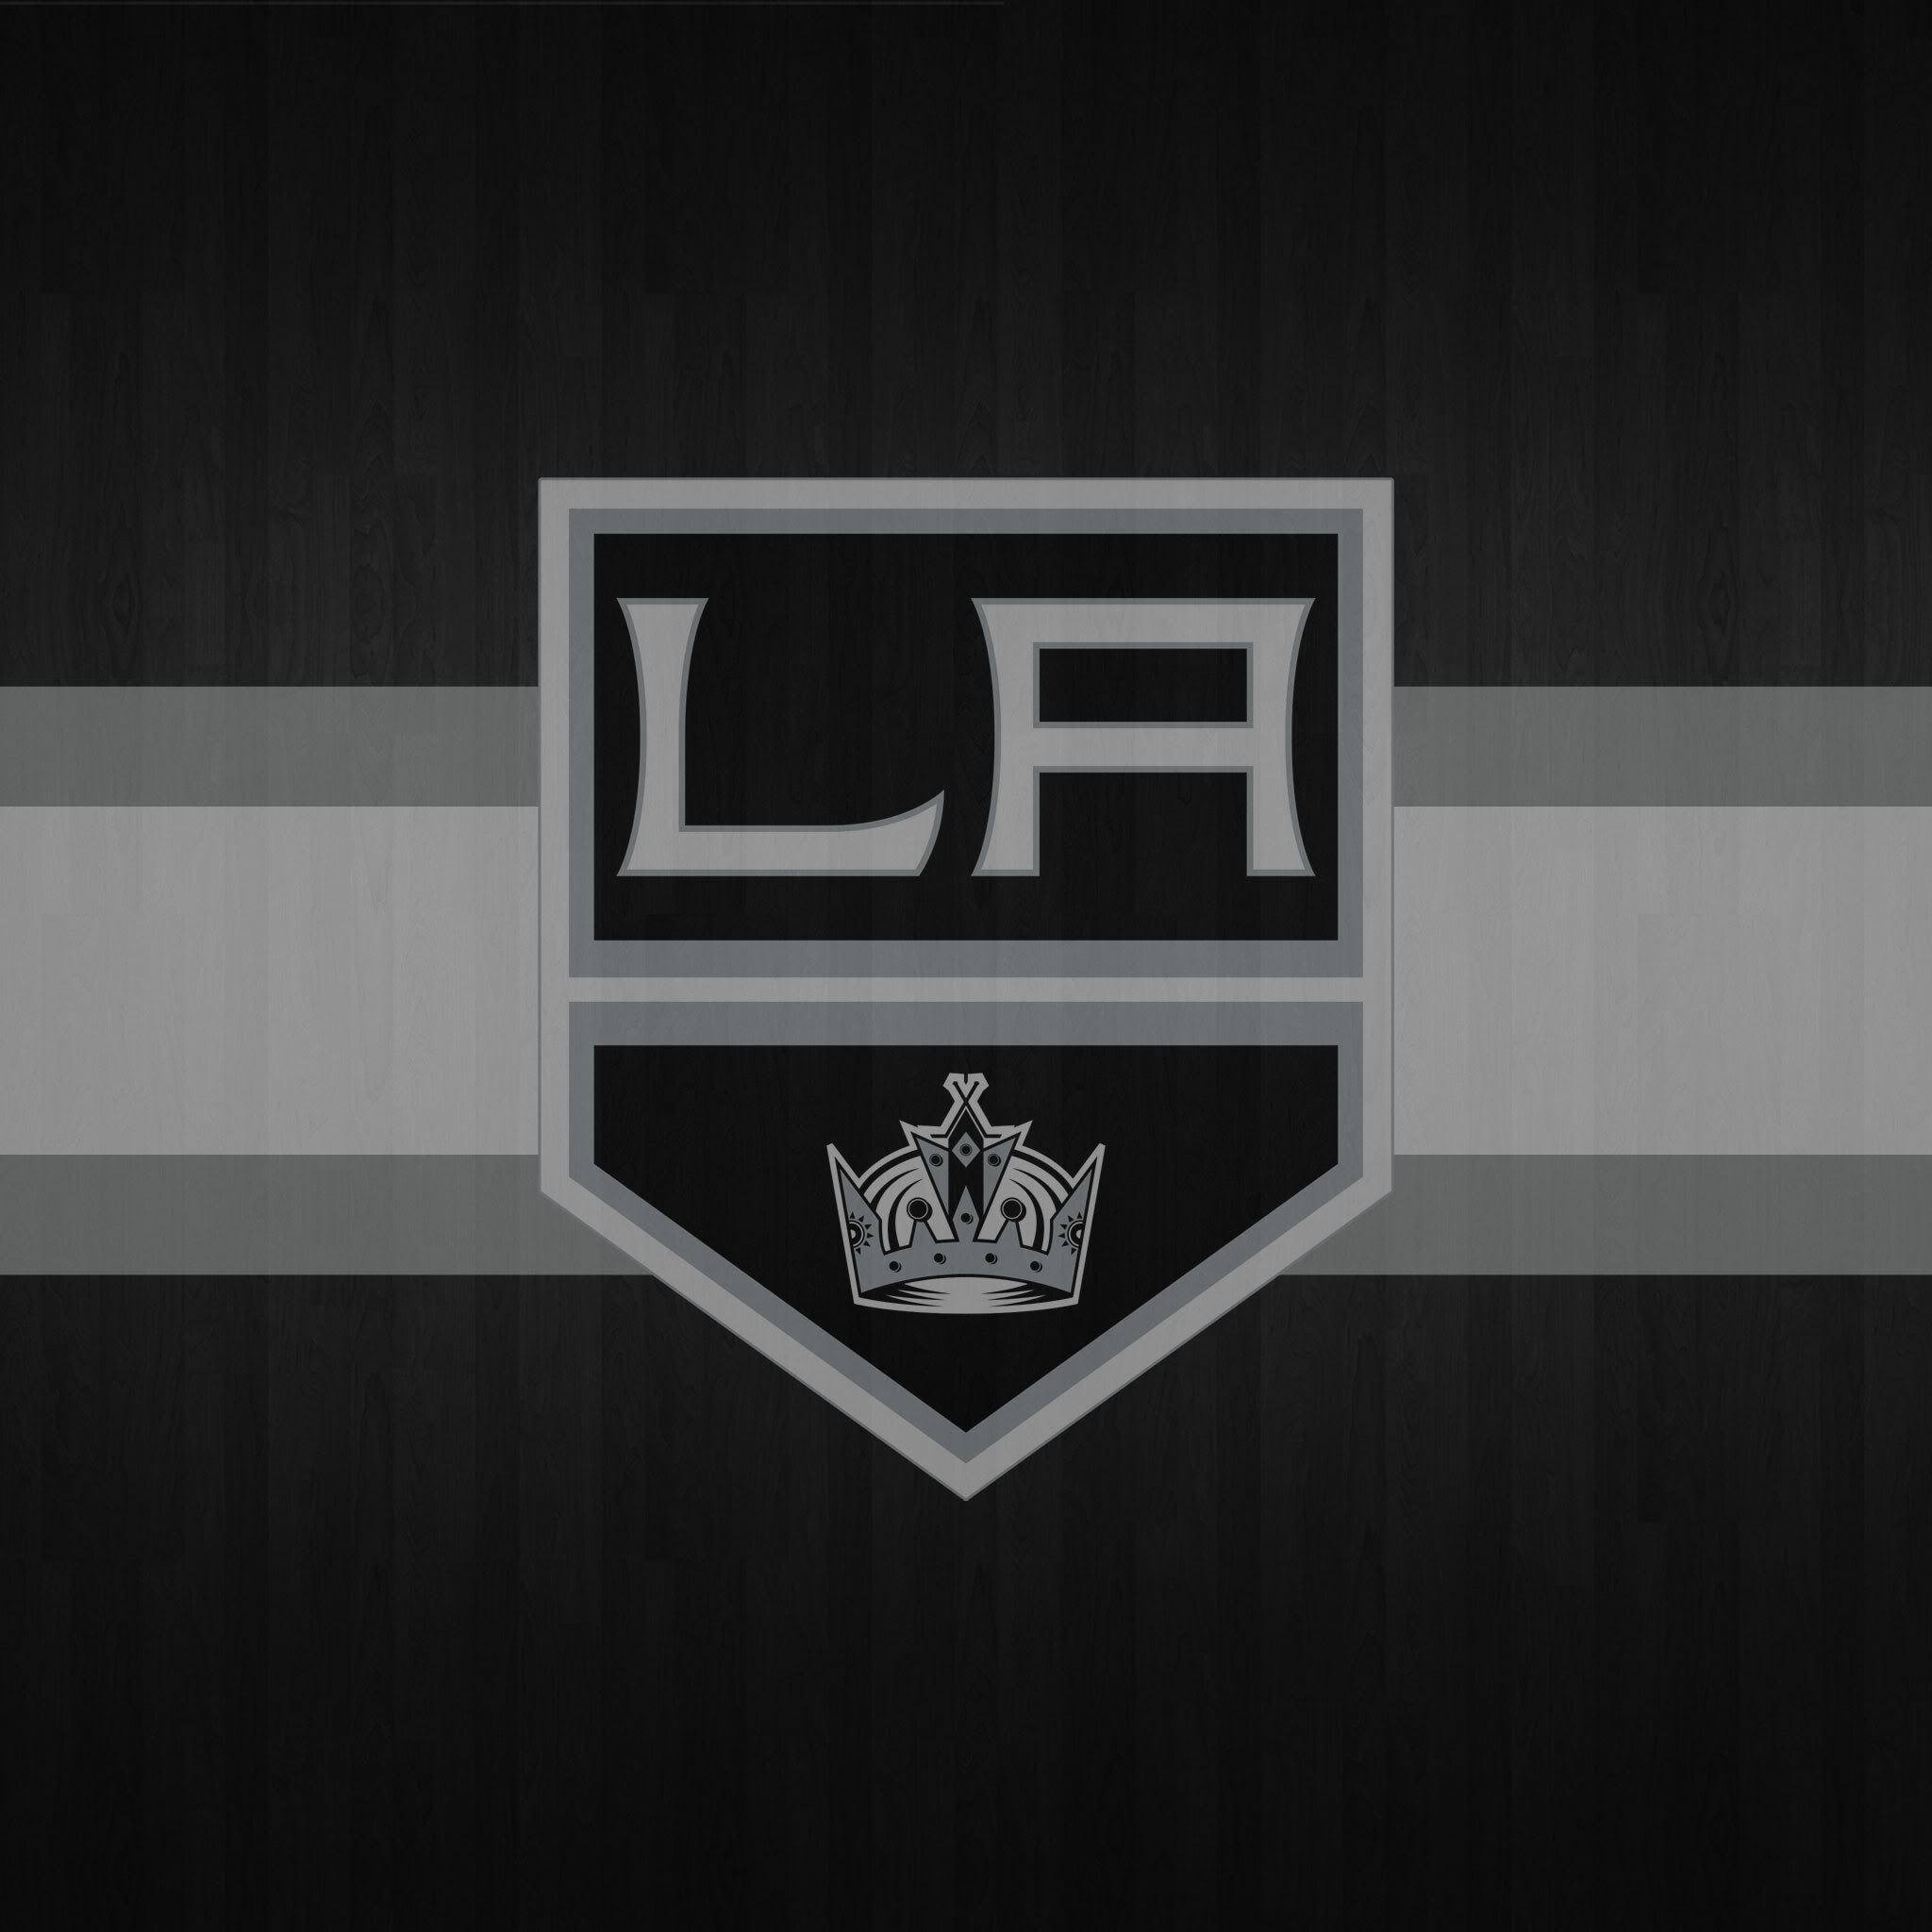 2048x2048 Android Los Angeles Kings Wallpaper | Full HD Pictures